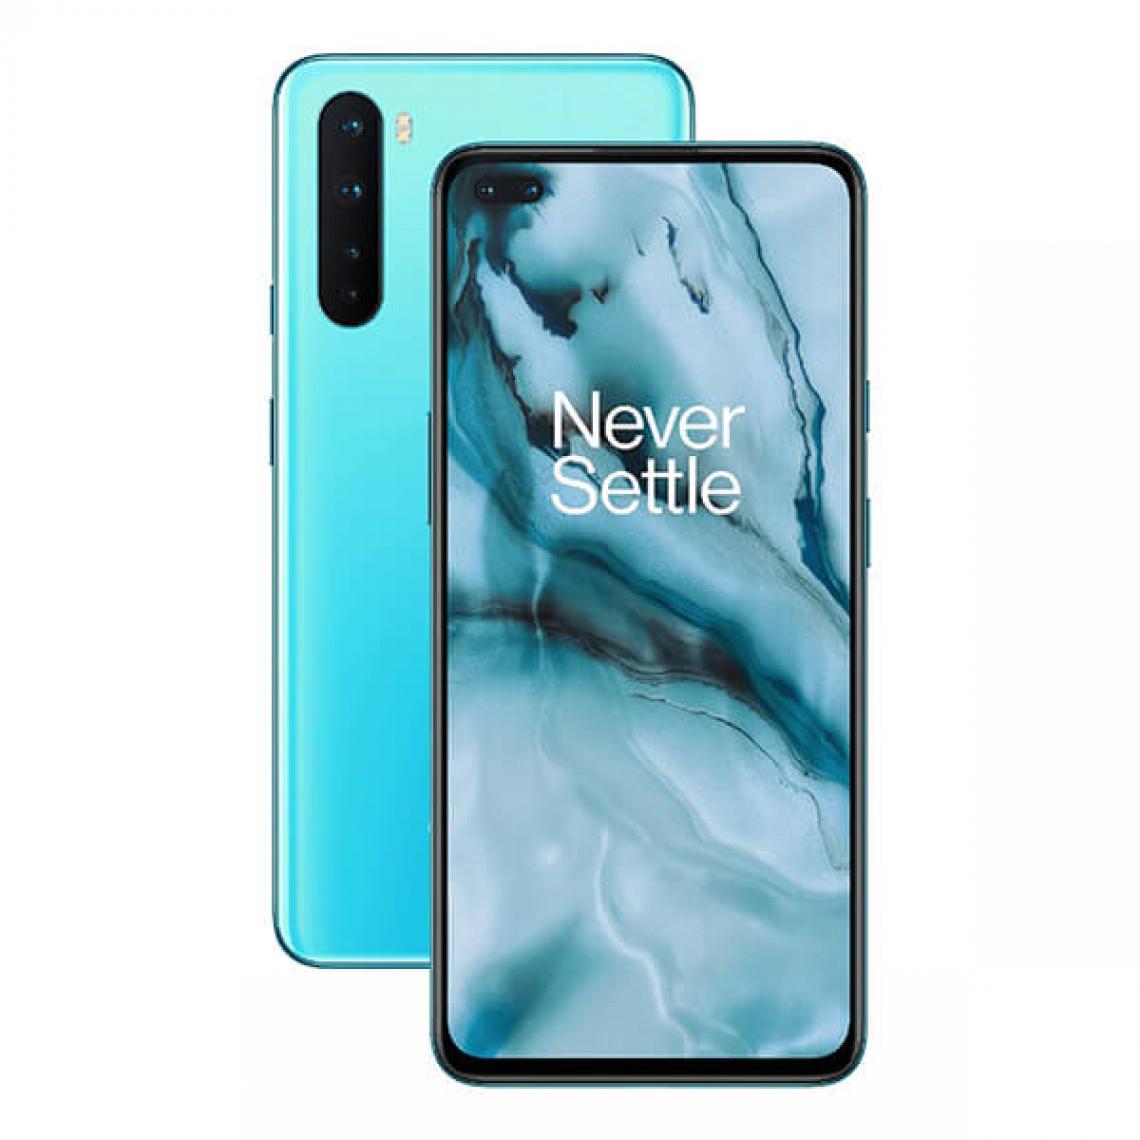 Oneplus - OnePlus Nord 5G 8Go/128Go Bleu (Blue Marble) Dual SIM - Smartphone Android